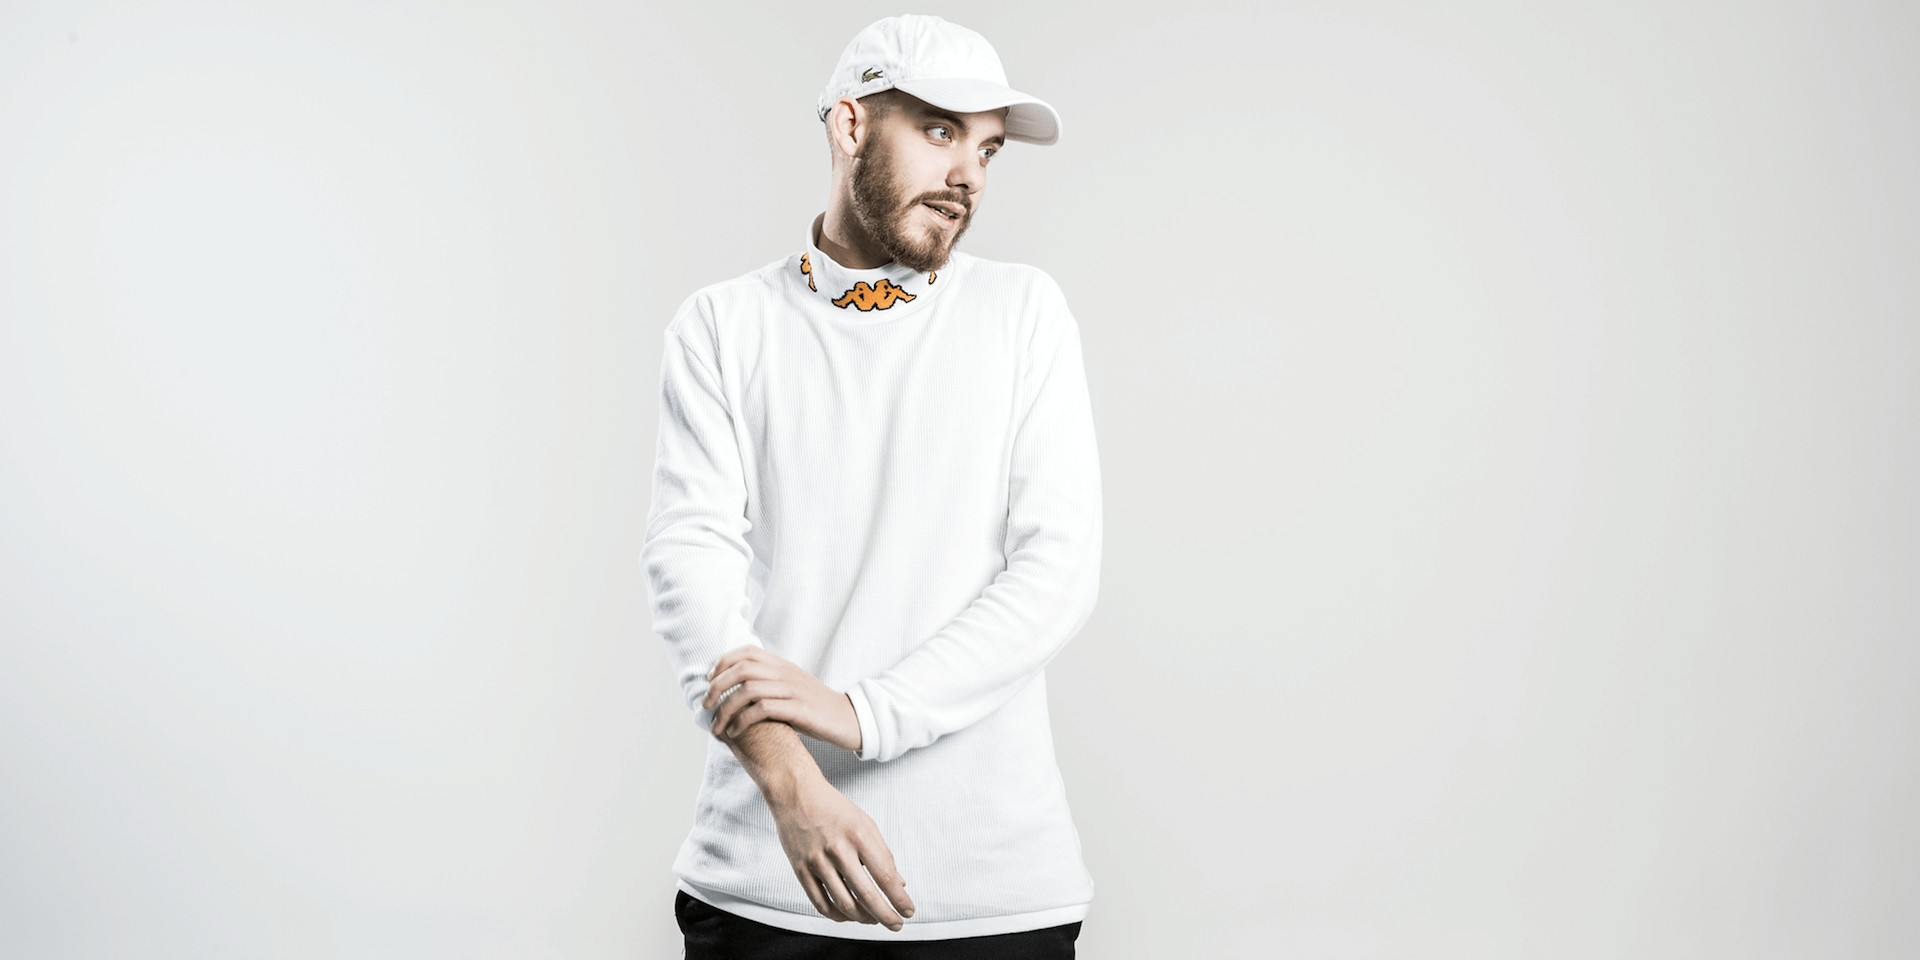 San Holo to perform in Singapore this July